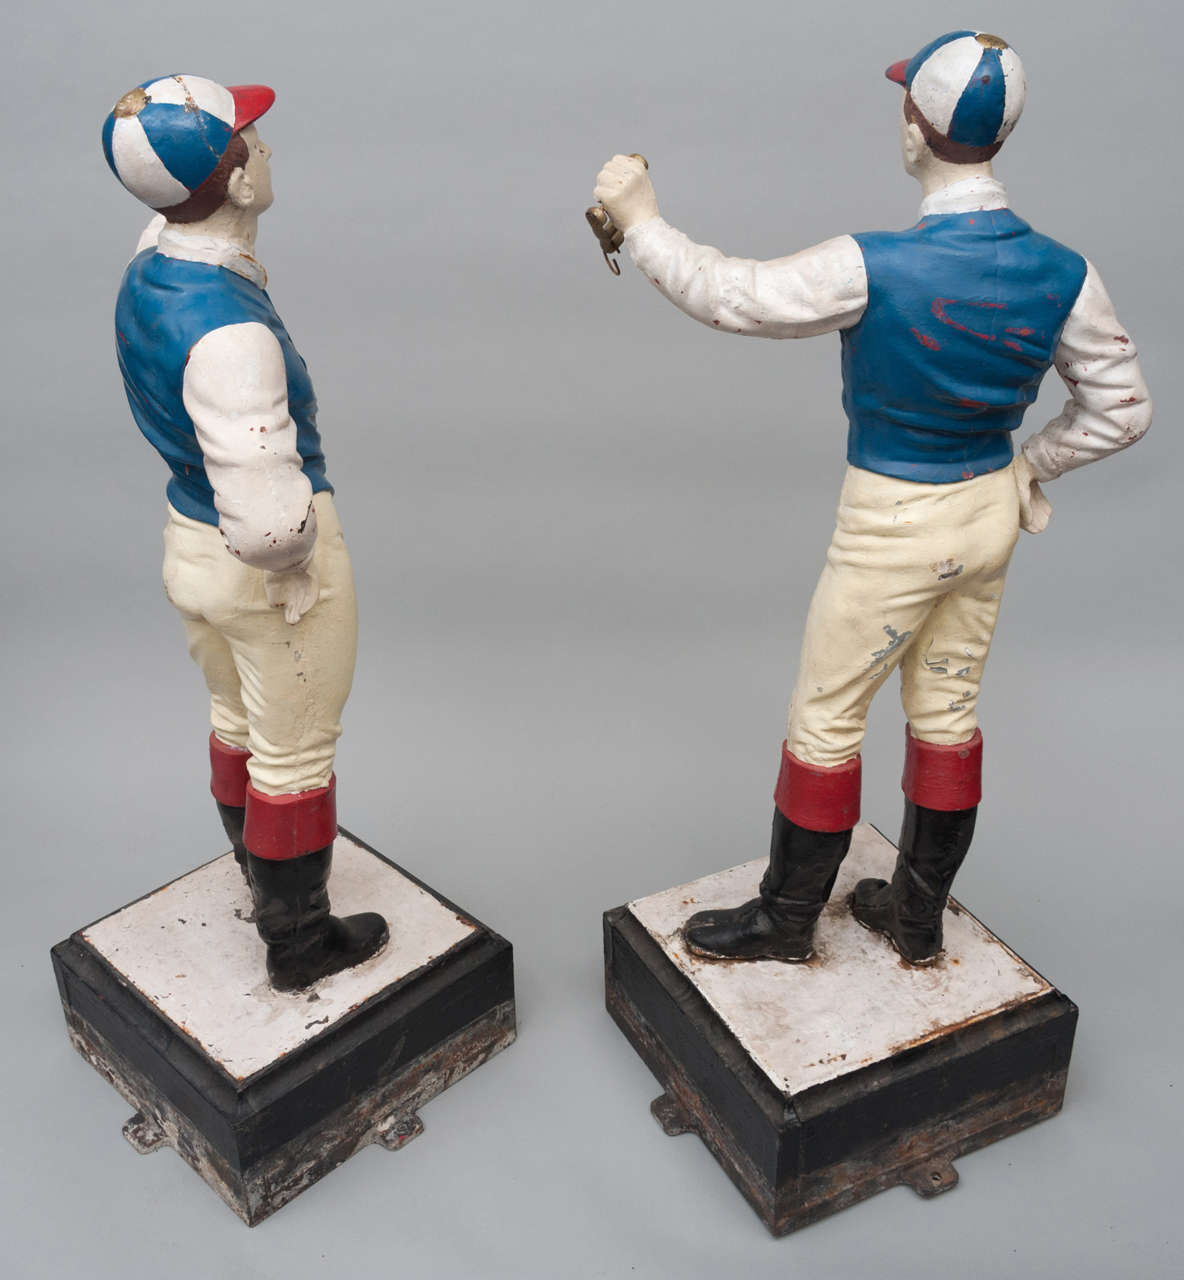 A rare pair of late C19th American cast iron jockey tethering posts,
the jockeys dressed in silks standing with one hand holding a ring, on a square base with four fixing lugs.